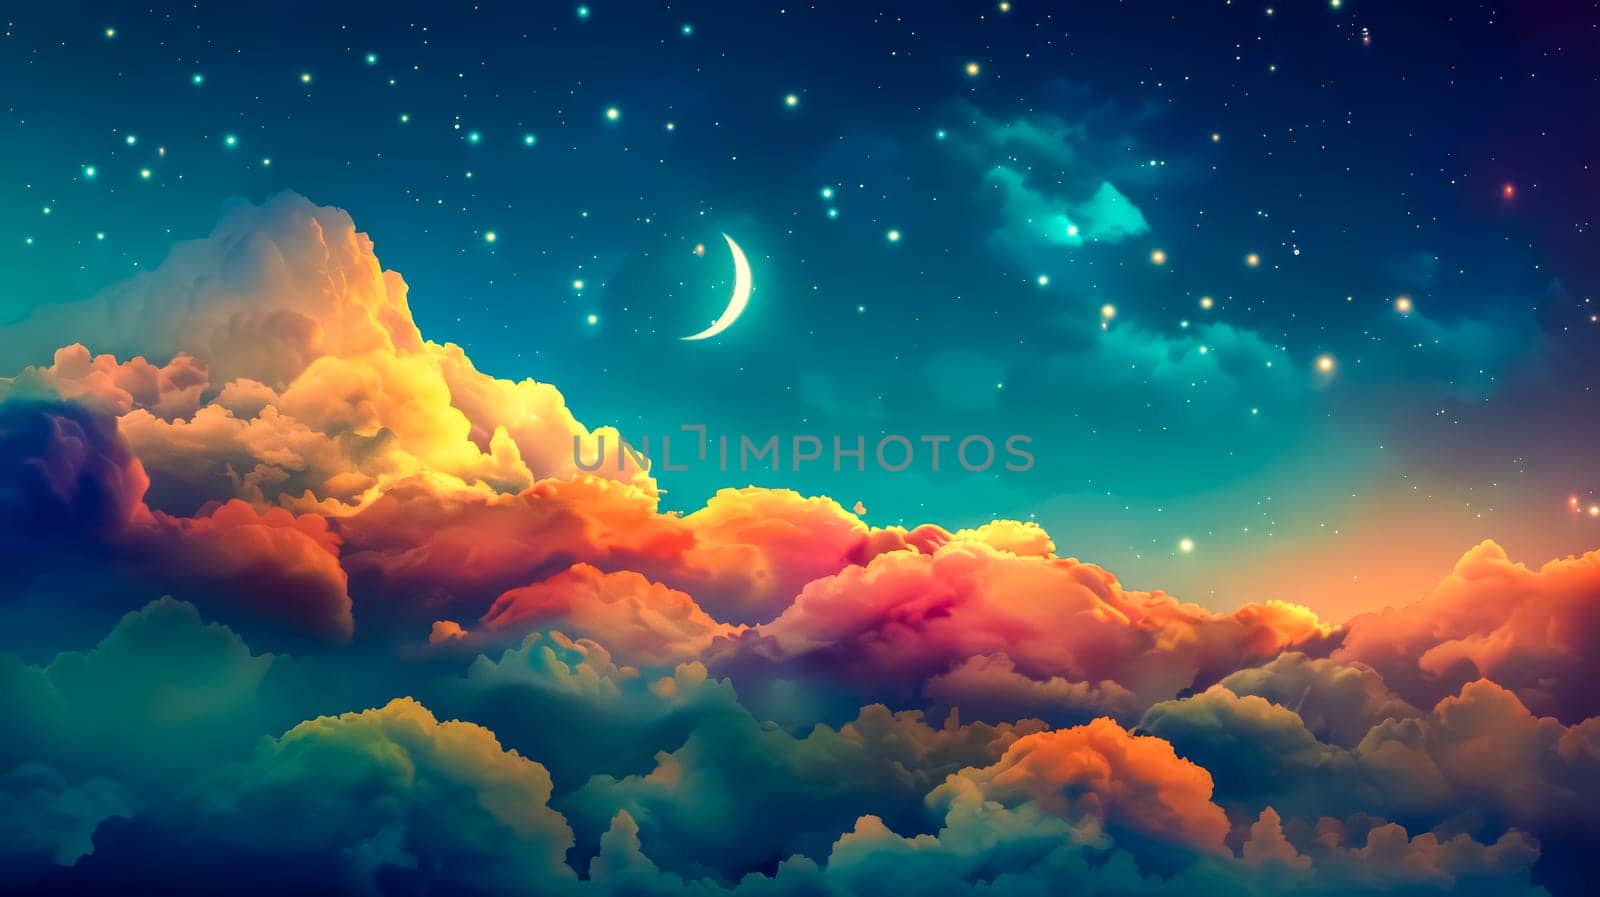 Dreamy sky with vibrant clouds and stars by Edophoto